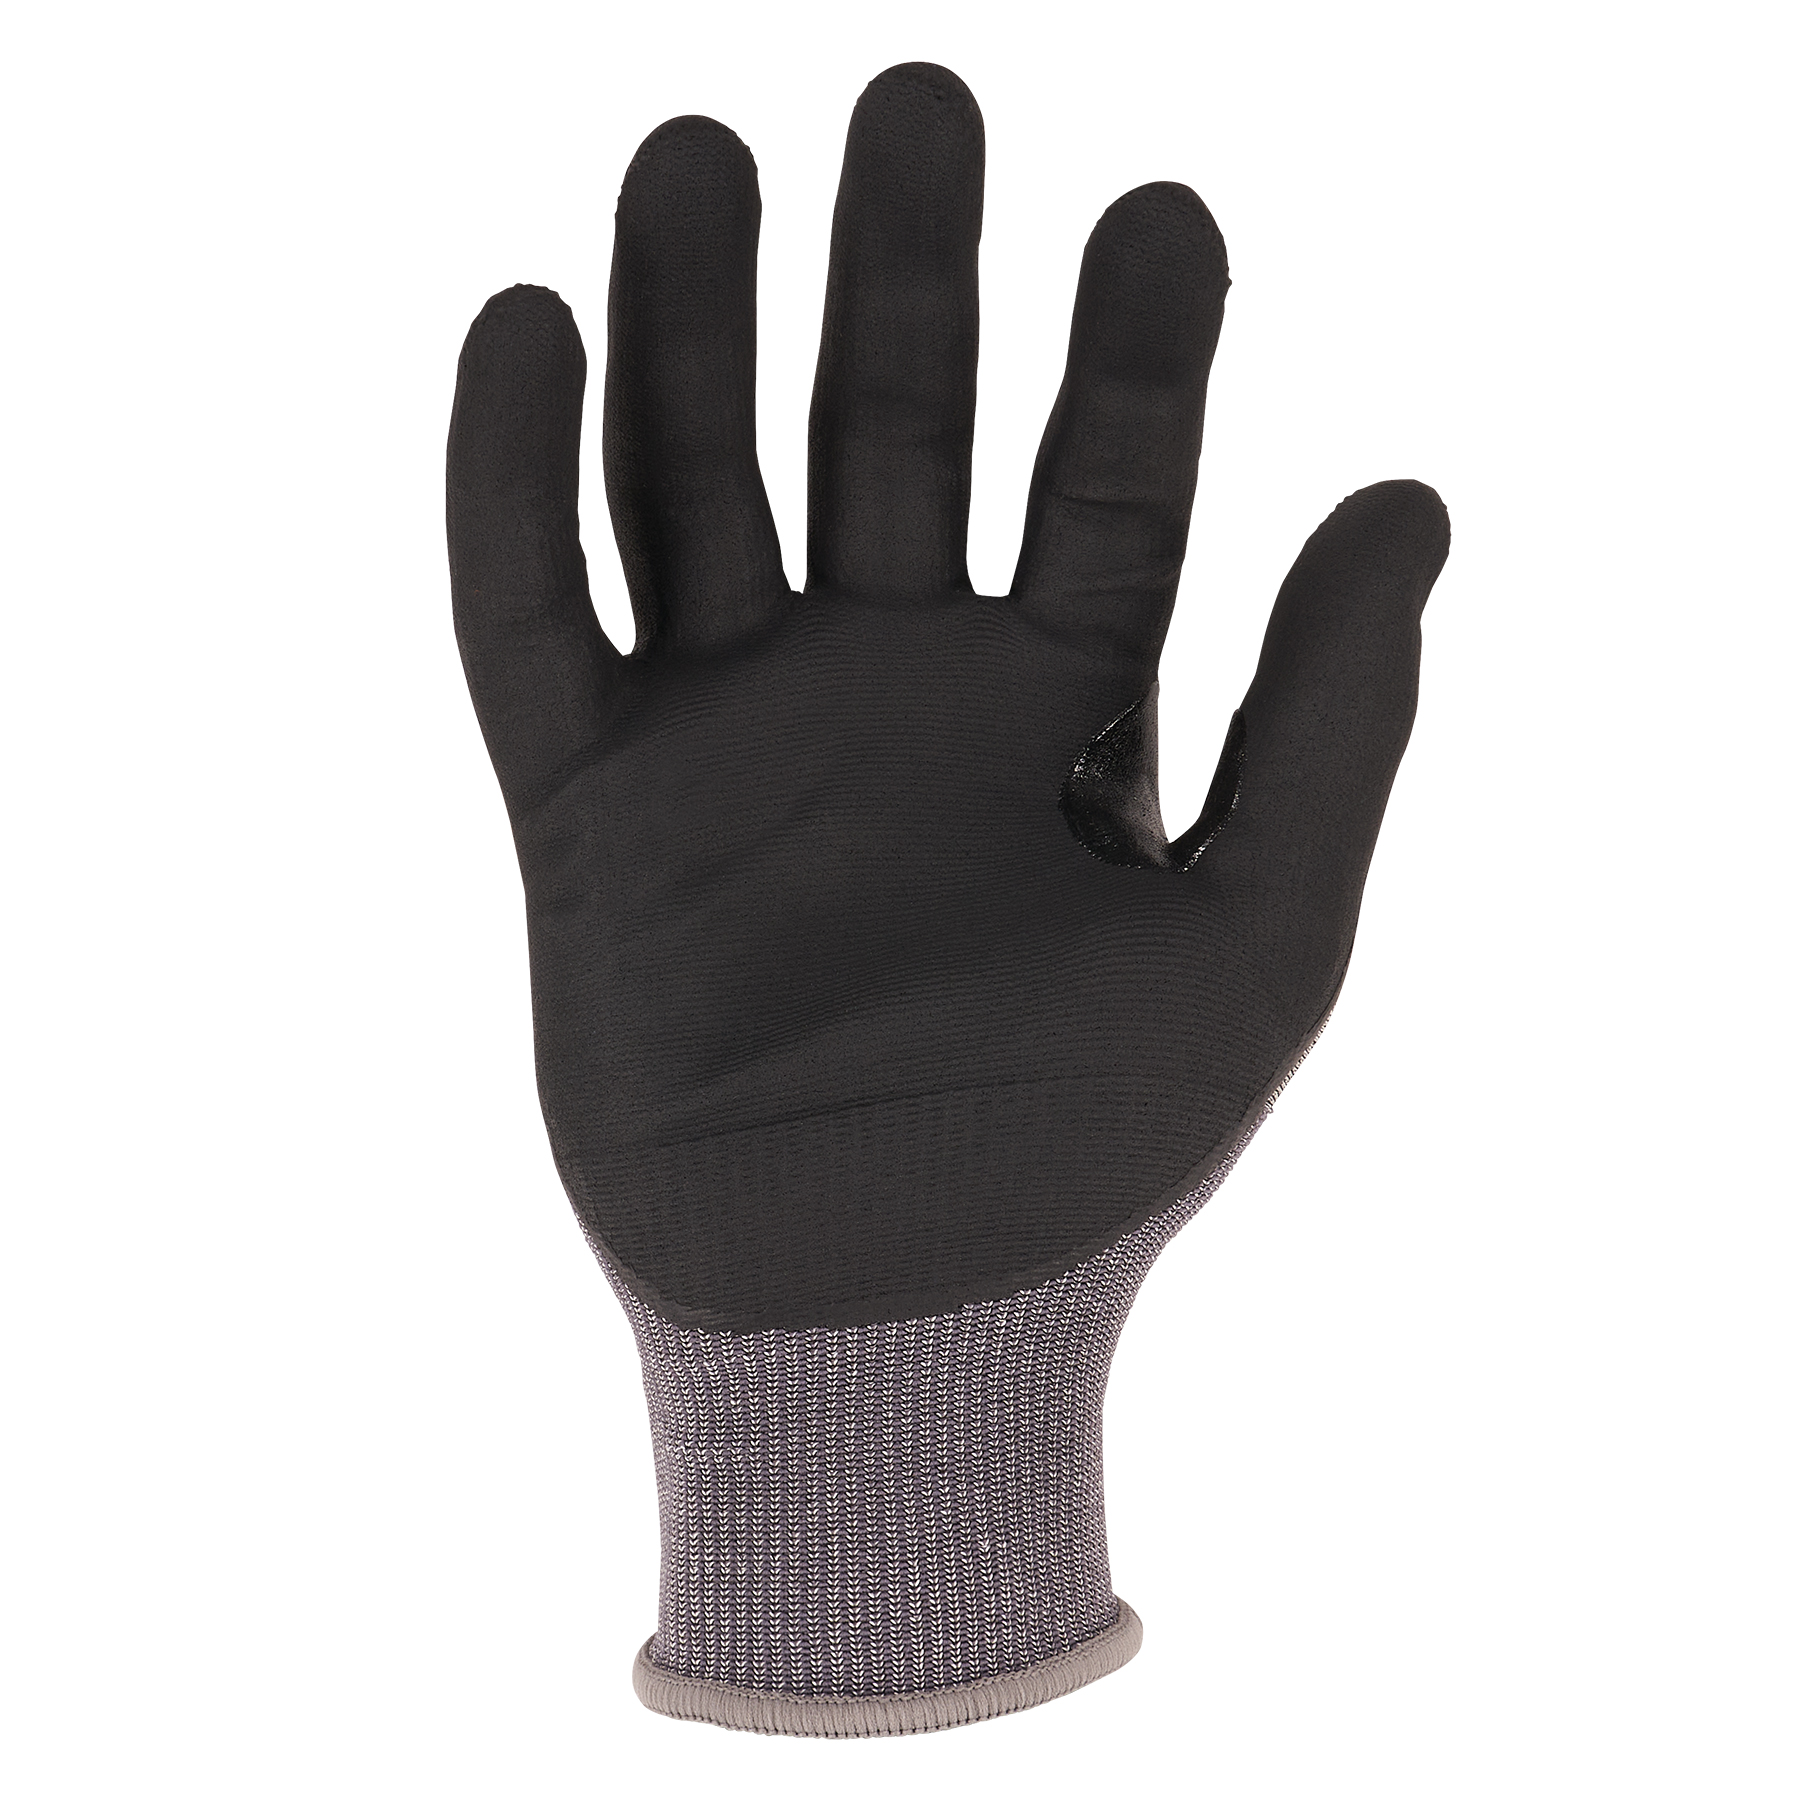 https://www.ergodyne.com/sites/default/files/product-images/10522-7043-nitrile-coated-cut-resistant-gloves-palm-small.jpg